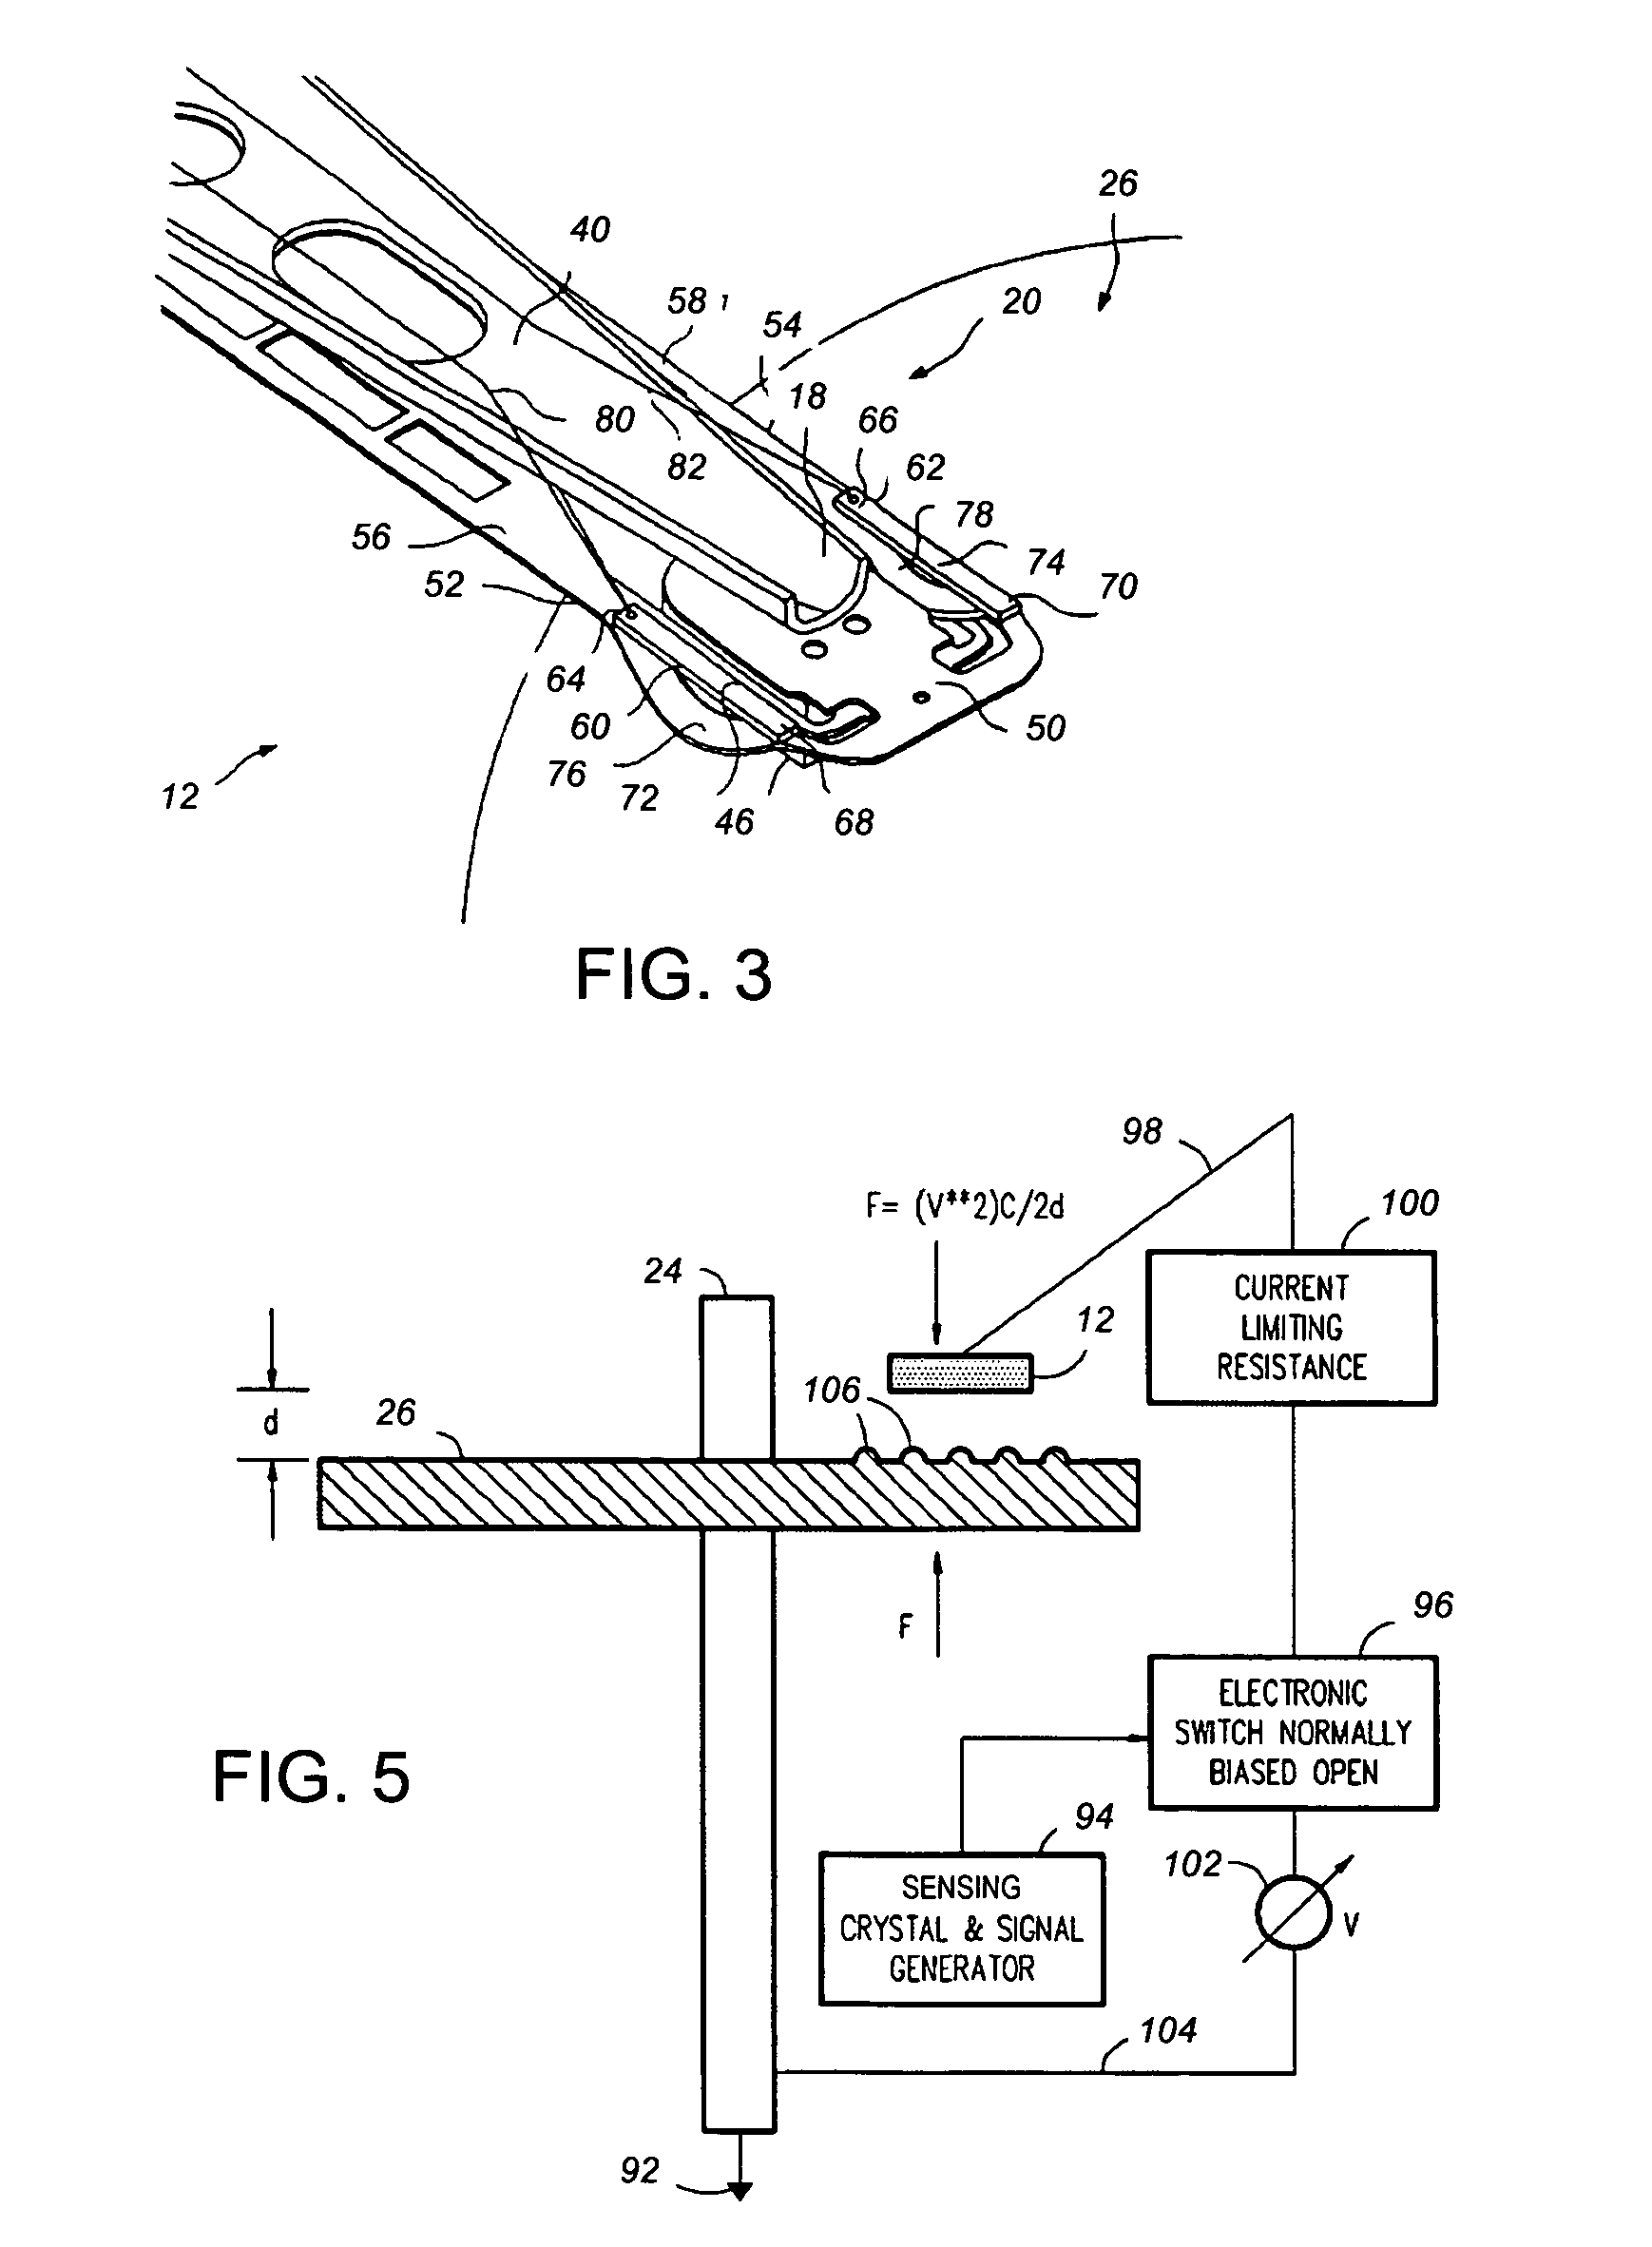 Method and system for dual element transducer flight height adjustment using combined thermal and electrostatic control